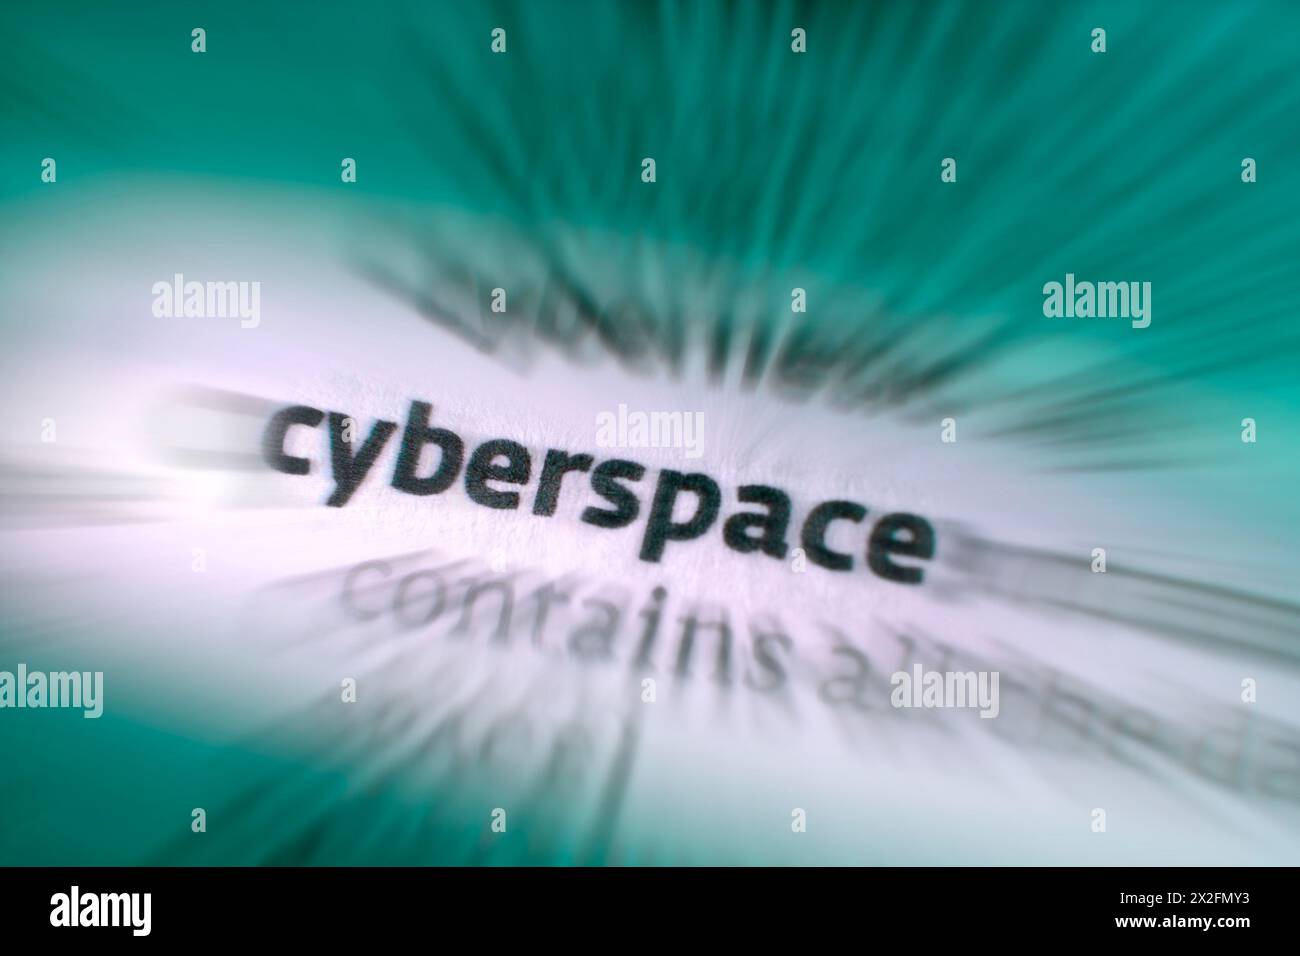 Cyberspace is an interconnected digital environment. It is a type of virtual world popularized with the rise of the Internet. Stock Photo